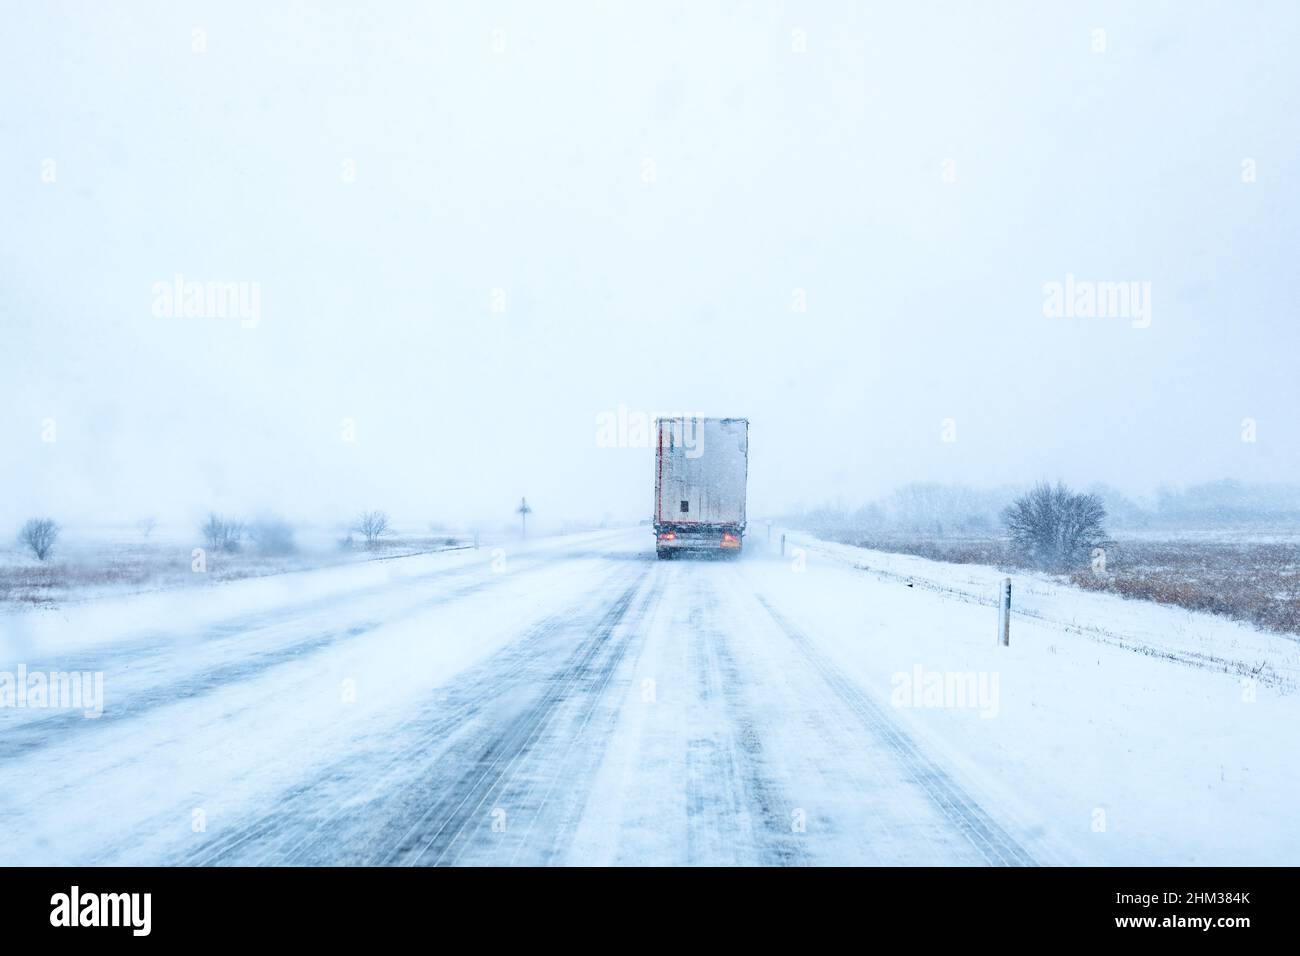 Freight transportation truck on the road in snow storm blizzard, bad weather conditions for transportation event, selective focus Stock Photo